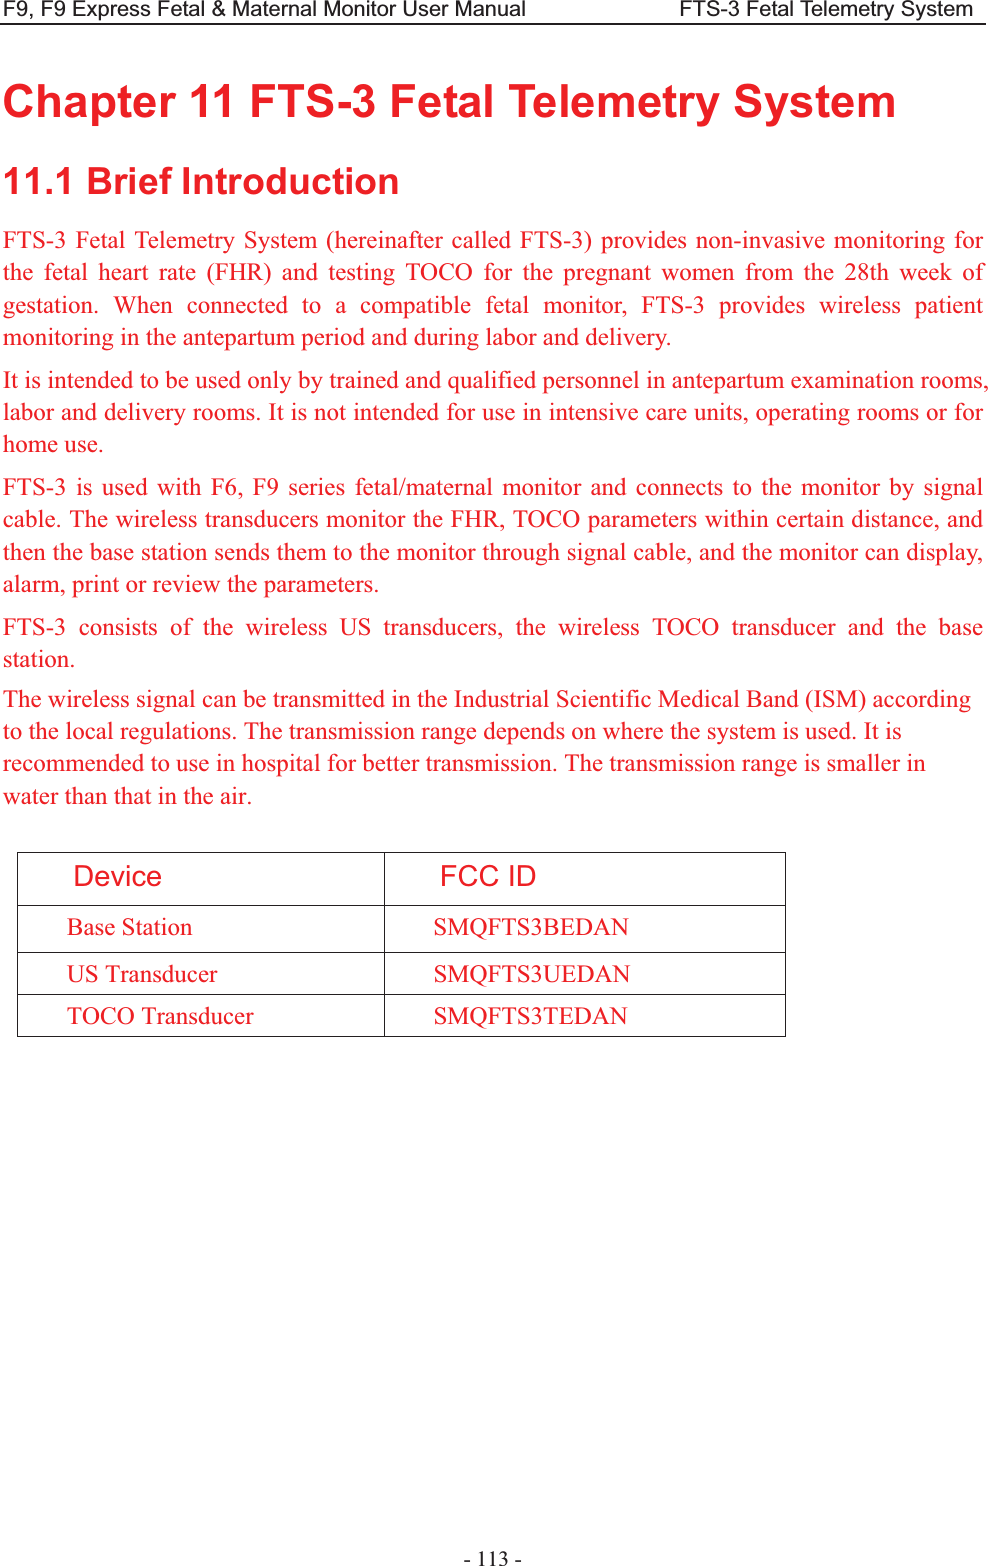 F9, F9 Express Fetal &amp; Maternal Monitor User Manual                            FTS-3 Fetal Telemetry System - 113 - Chapter 11 FTS-3 Fetal Telemetry System 11.1 Brief Introduction FTS-3 Fetal Telemetry System (hereinafter called FTS-3) provides non-invasive monitoring for the fetal heart rate (FHR) and testing TOCO for the pregnant women from the 28th week of gestation. When connected to a compatible fetal monitor, FTS-3 provides wireless patient monitoring in the antepartum period and during labor and delivery.     It is intended to be used only by trained and qualified personnel in antepartum examination rooms, labor and delivery rooms. It is not intended for use in intensive care units, operating rooms or for home use.   FTS-3 is used with F6, F9 series fetal/maternal monitor and connects to the monitor by signal cable. The wireless transducers monitor the FHR, TOCO parameters within certain distance, and then the base station sends them to the monitor through signal cable, and the monitor can display, alarm, print or review the parameters. FTS-3 consists of the wireless US transducers, the wireless TOCO transducer and the base station. The wireless signal can be transmitted in the Industrial Scientific Medical Band (ISM) according to the local regulations. The transmission range depends on where the system is used. It is recommended to use in hospital for better transmission. The transmission range is smaller in water than that in the air.  Device FCC ID Base Station  SMQFTS3BEDAN US Transducer  SMQFTS3UEDAN TOCO Transducer  SMQFTS3TEDAN  